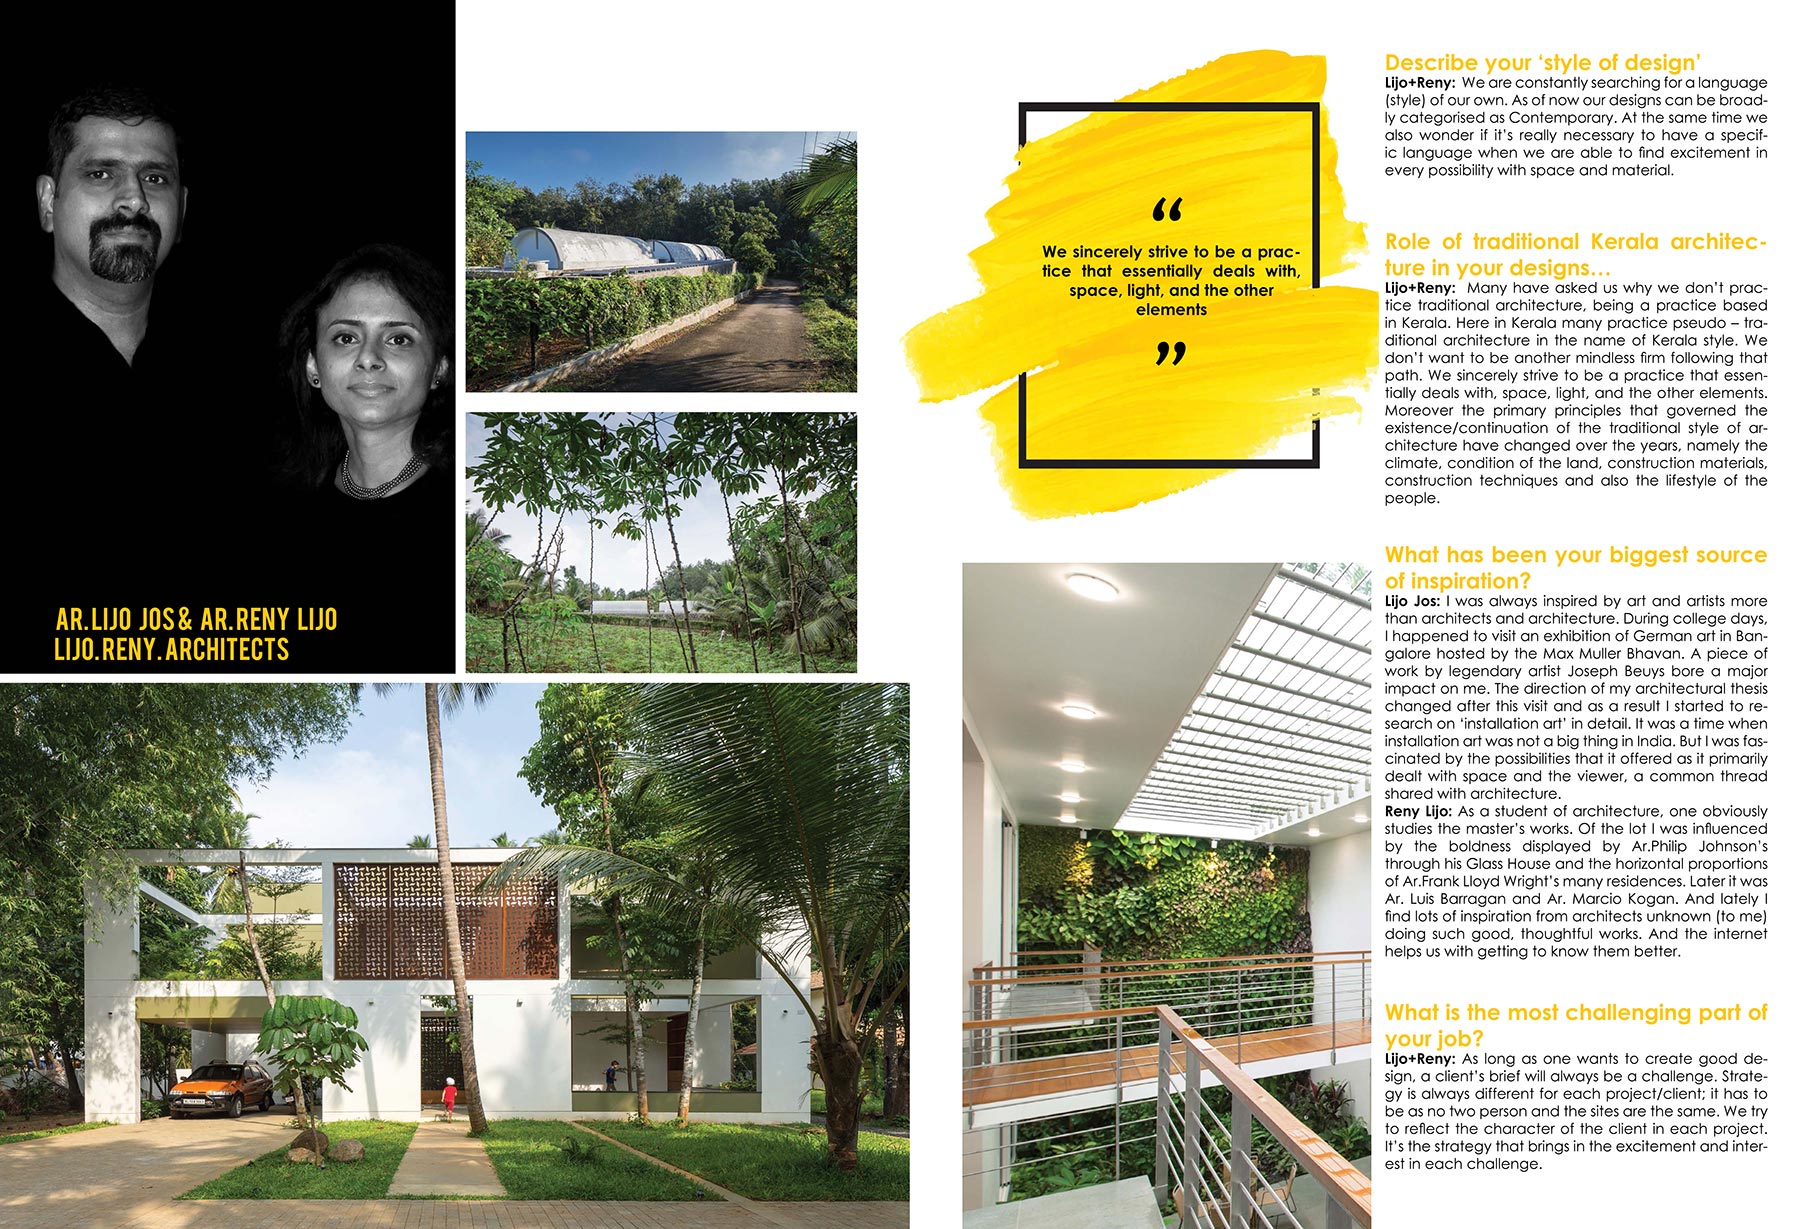 idecorama-magazine-feature-lijo-reny-architects-among-top-100-design-luminaries-in-their-3rd-anniversary-issue-1